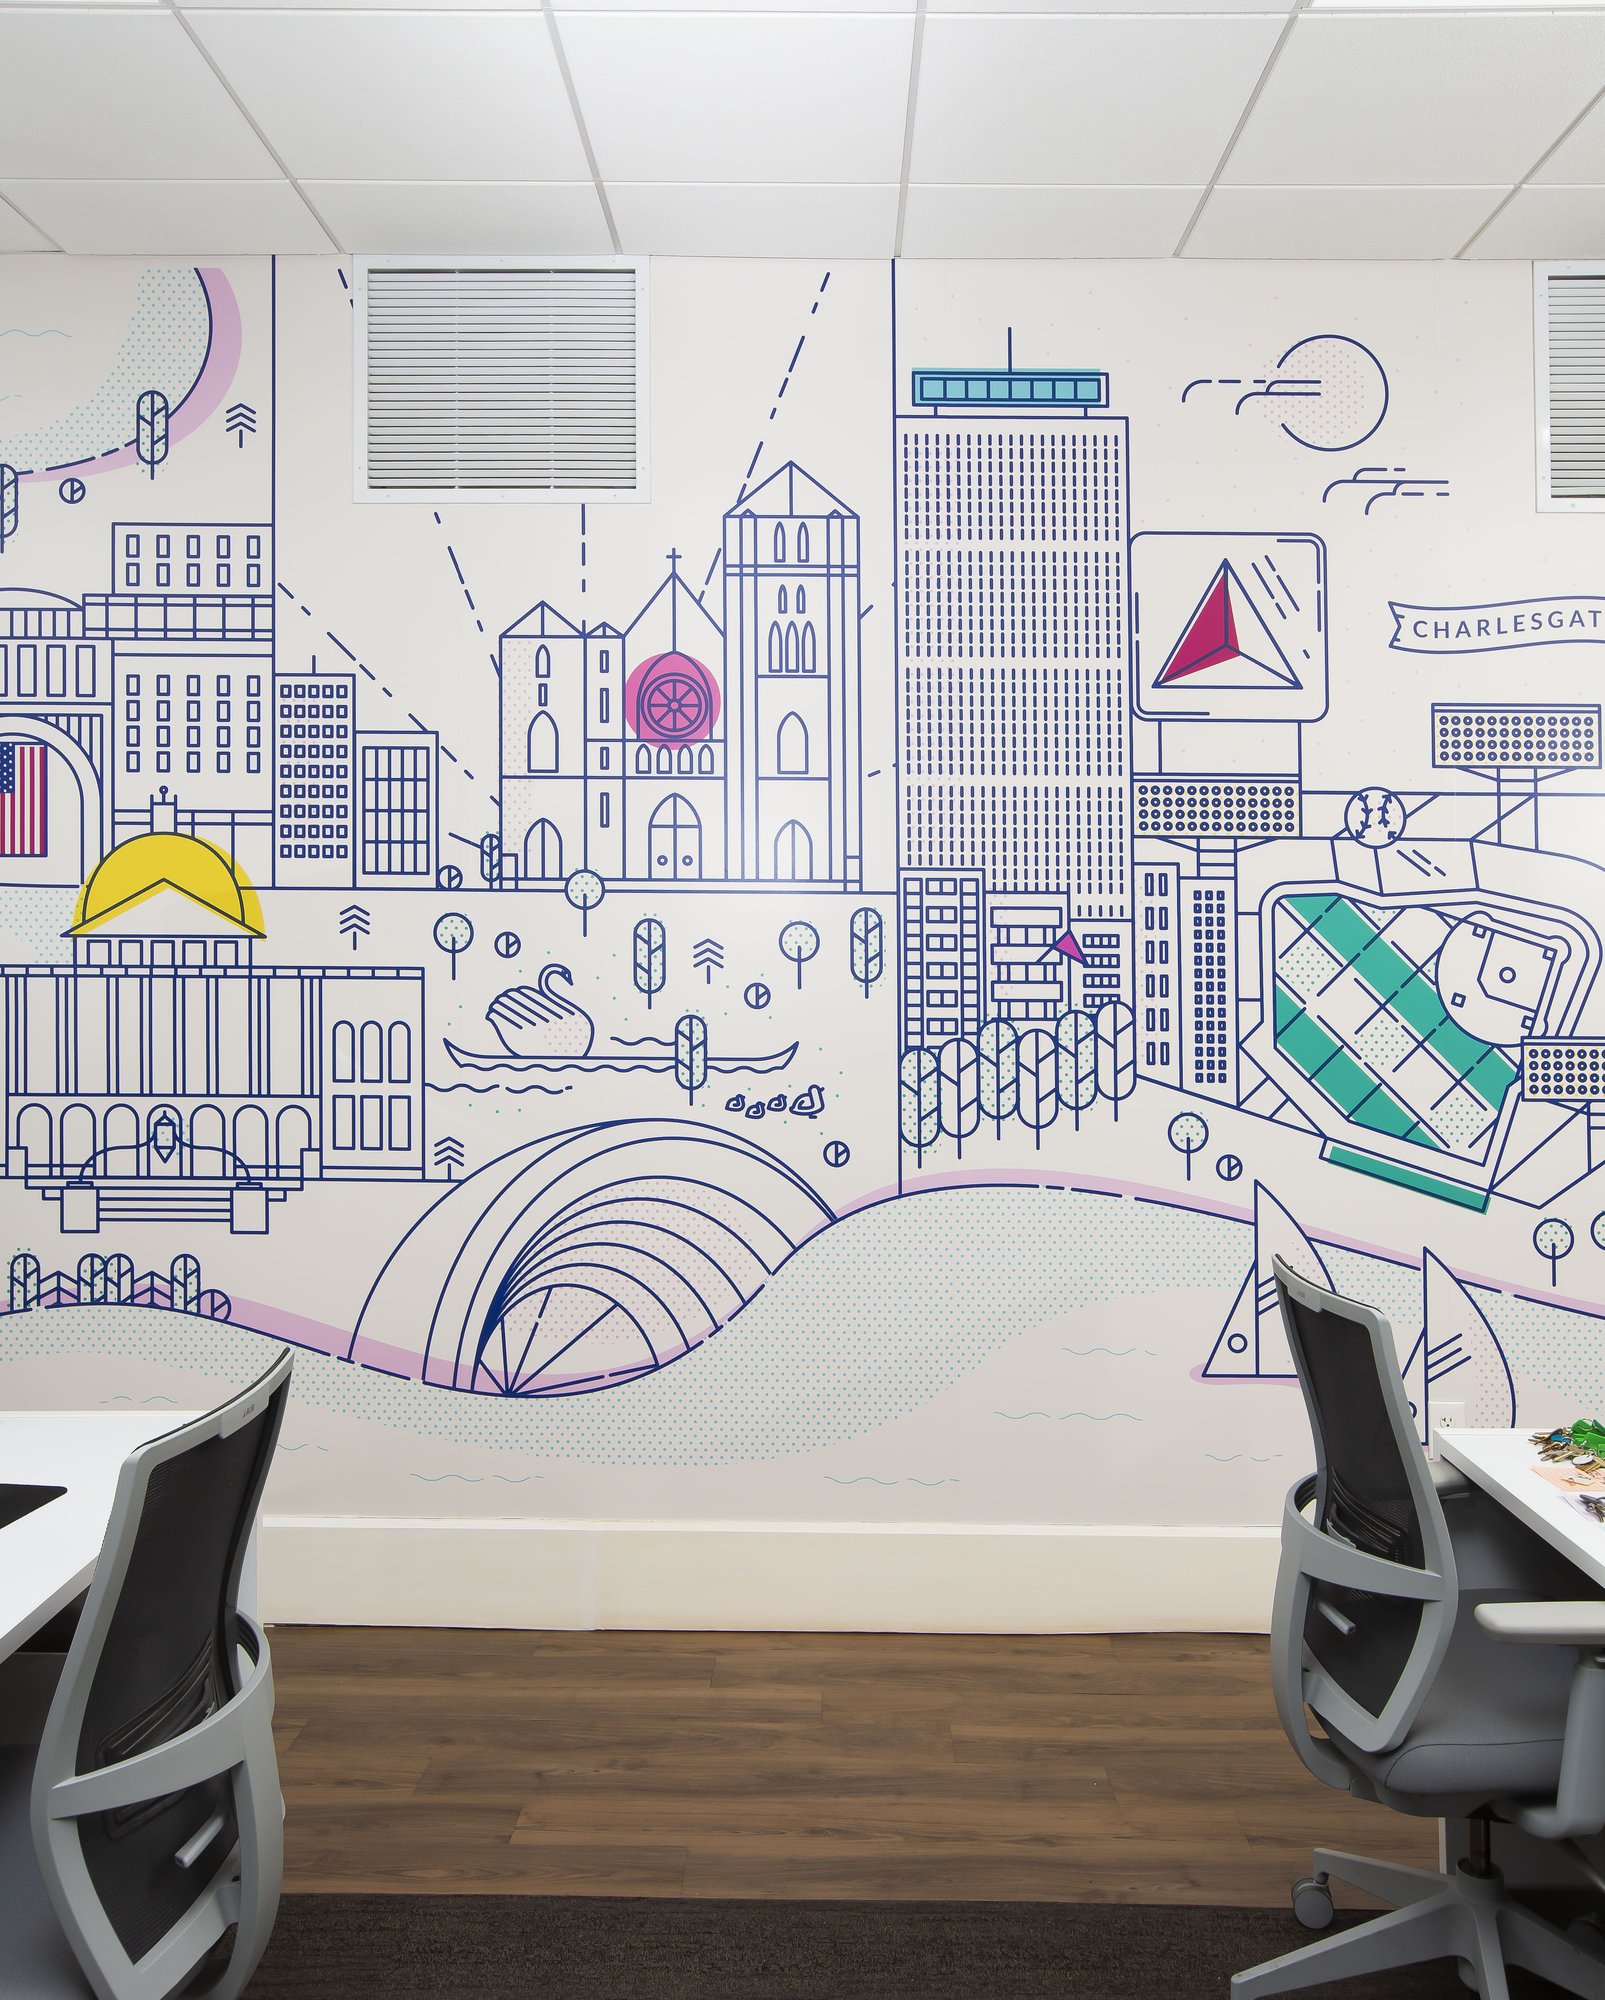 CHARLESGATE office wall graphic